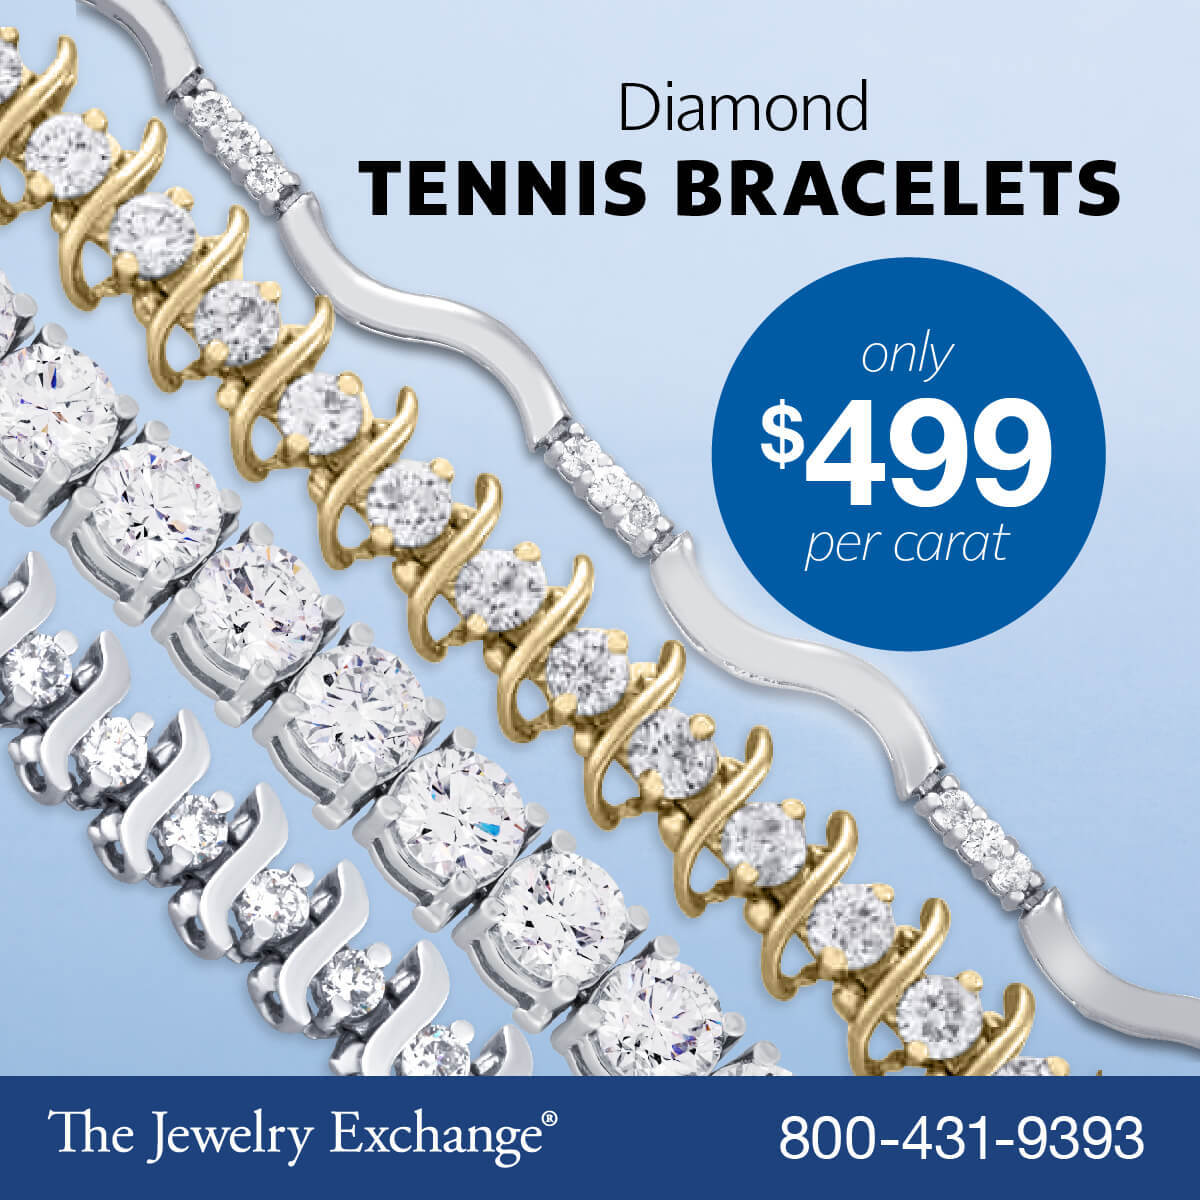 Save up to 80% buying factory direct from the Jewelry Exchange || Diamond tennis bracelets are $499 per carat 💎 Guaranteed to appraise for double! Visit your nearest Jewelry Exchange or find us online jewelryexchange.com